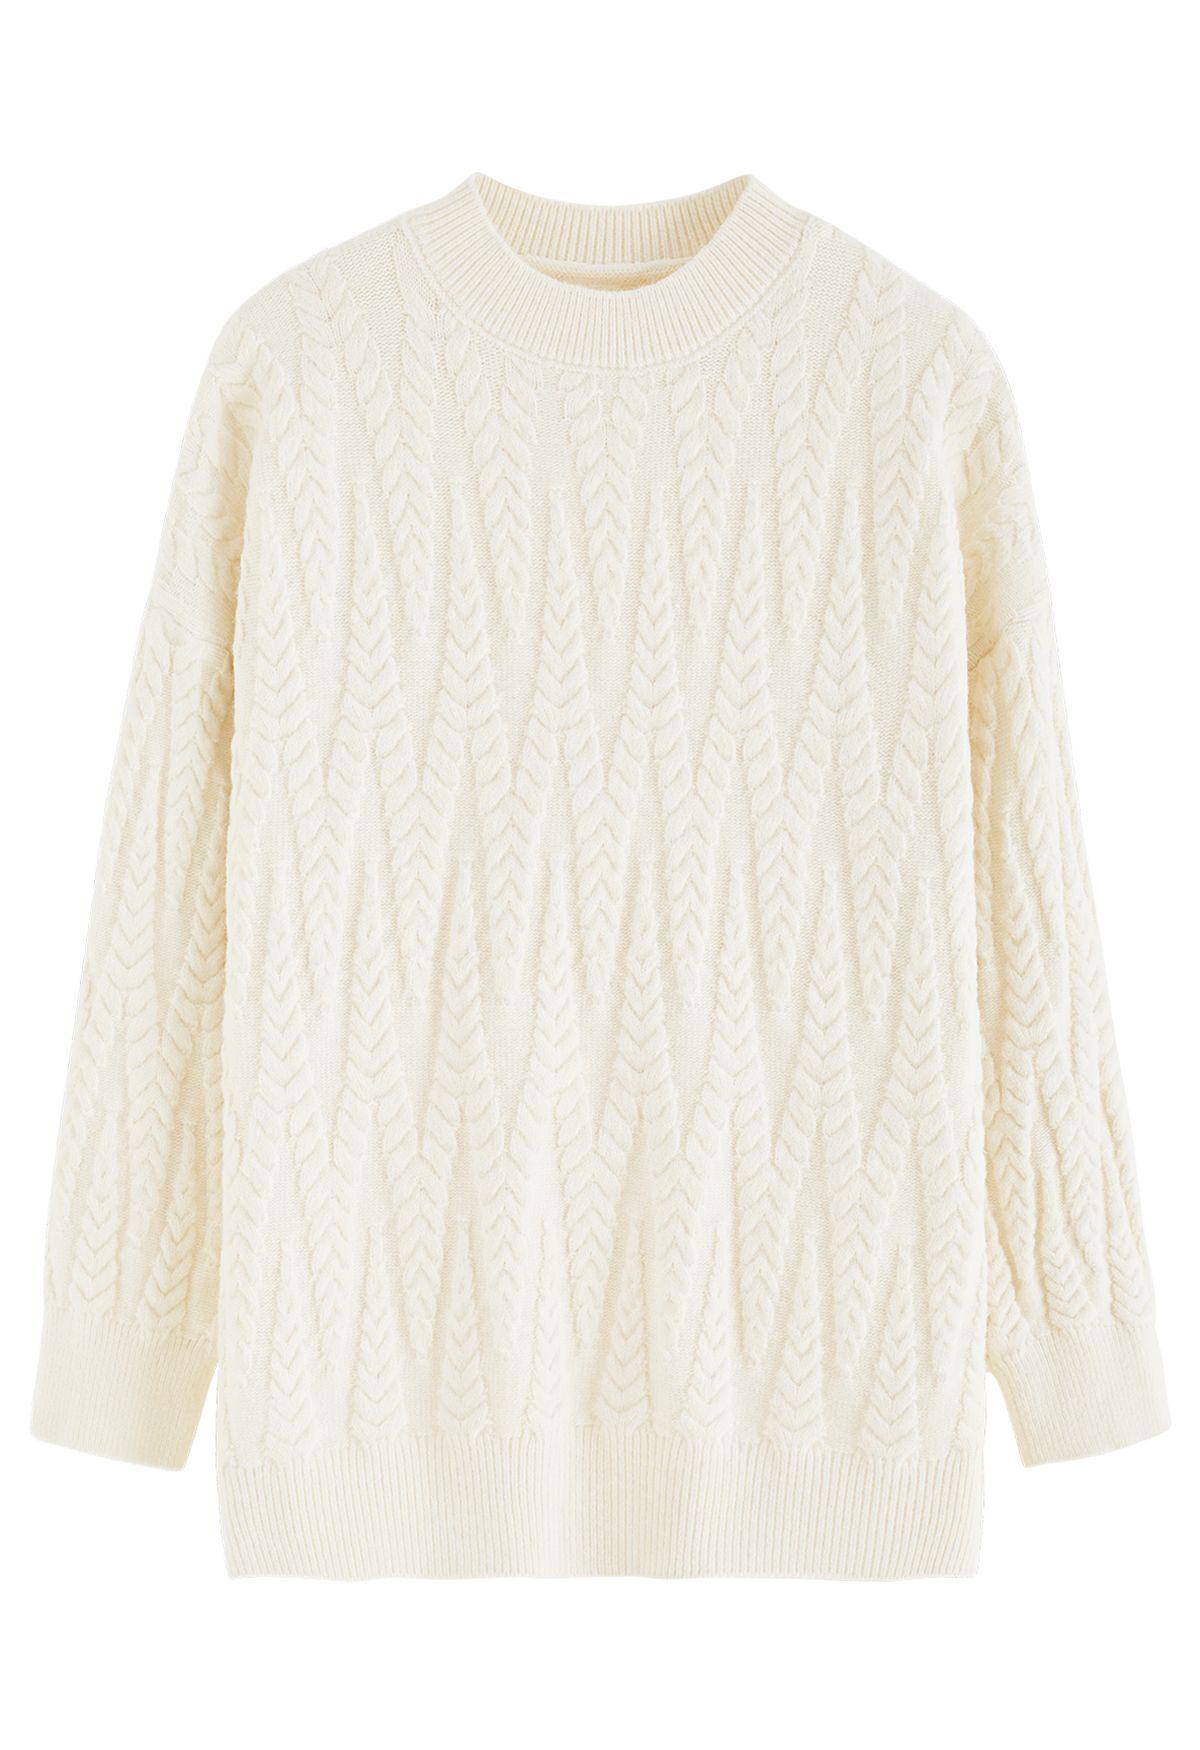 Zigzag Braided Chunky Knit Sweater in Cream